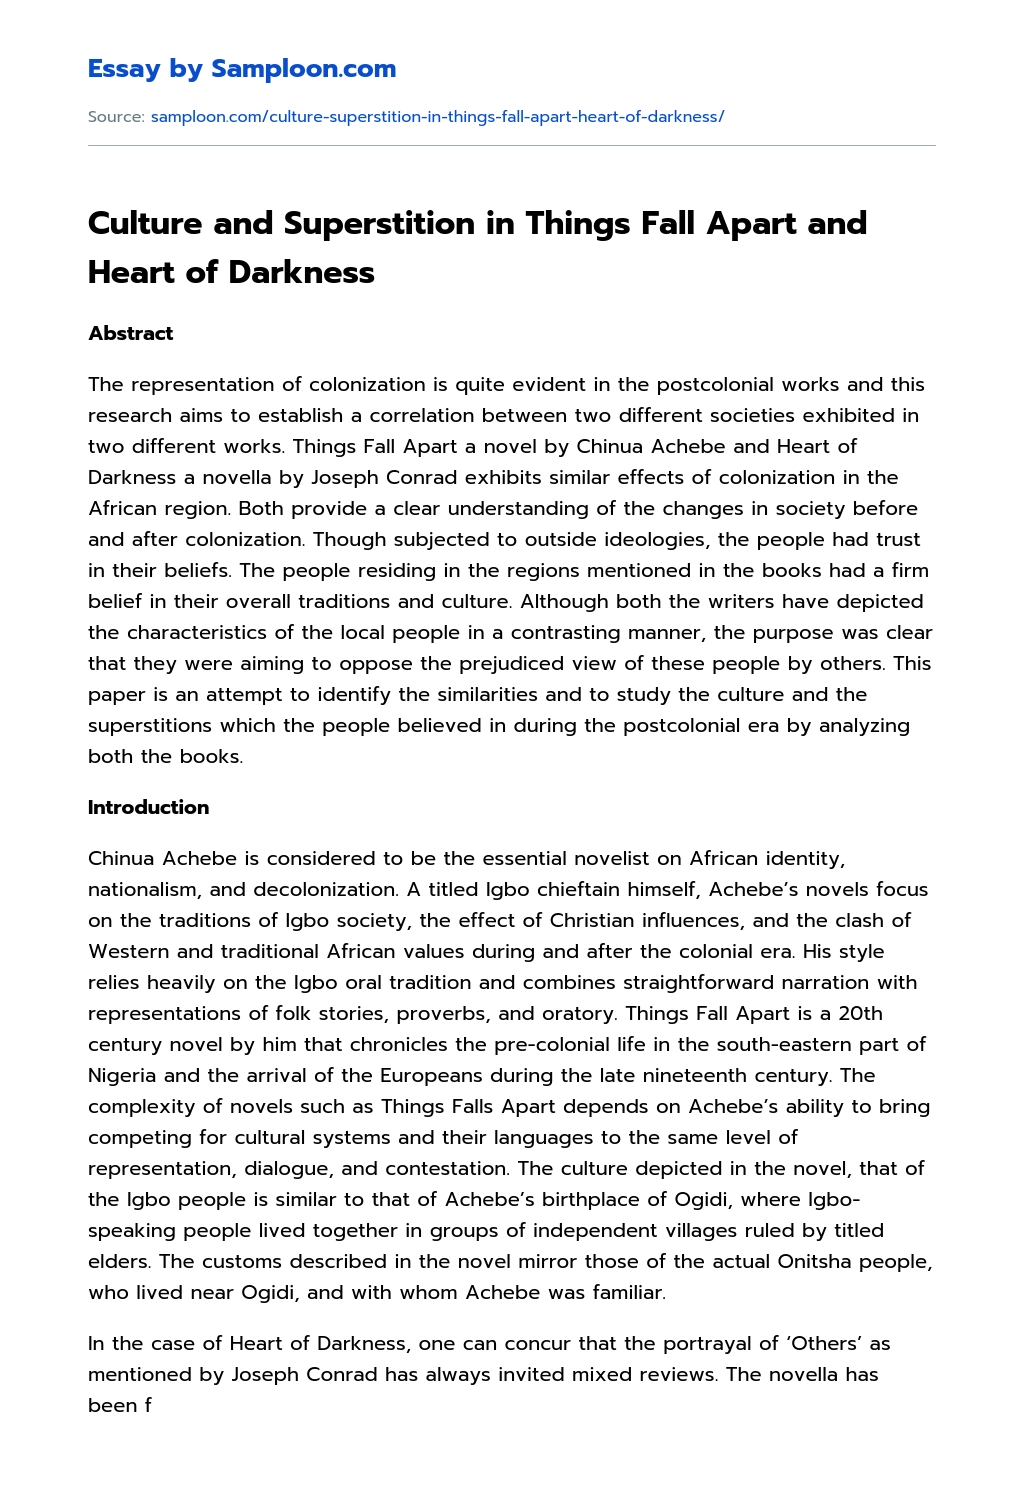 Culture and Superstition in Things Fall Apart and Heart of Darkness Summary essay